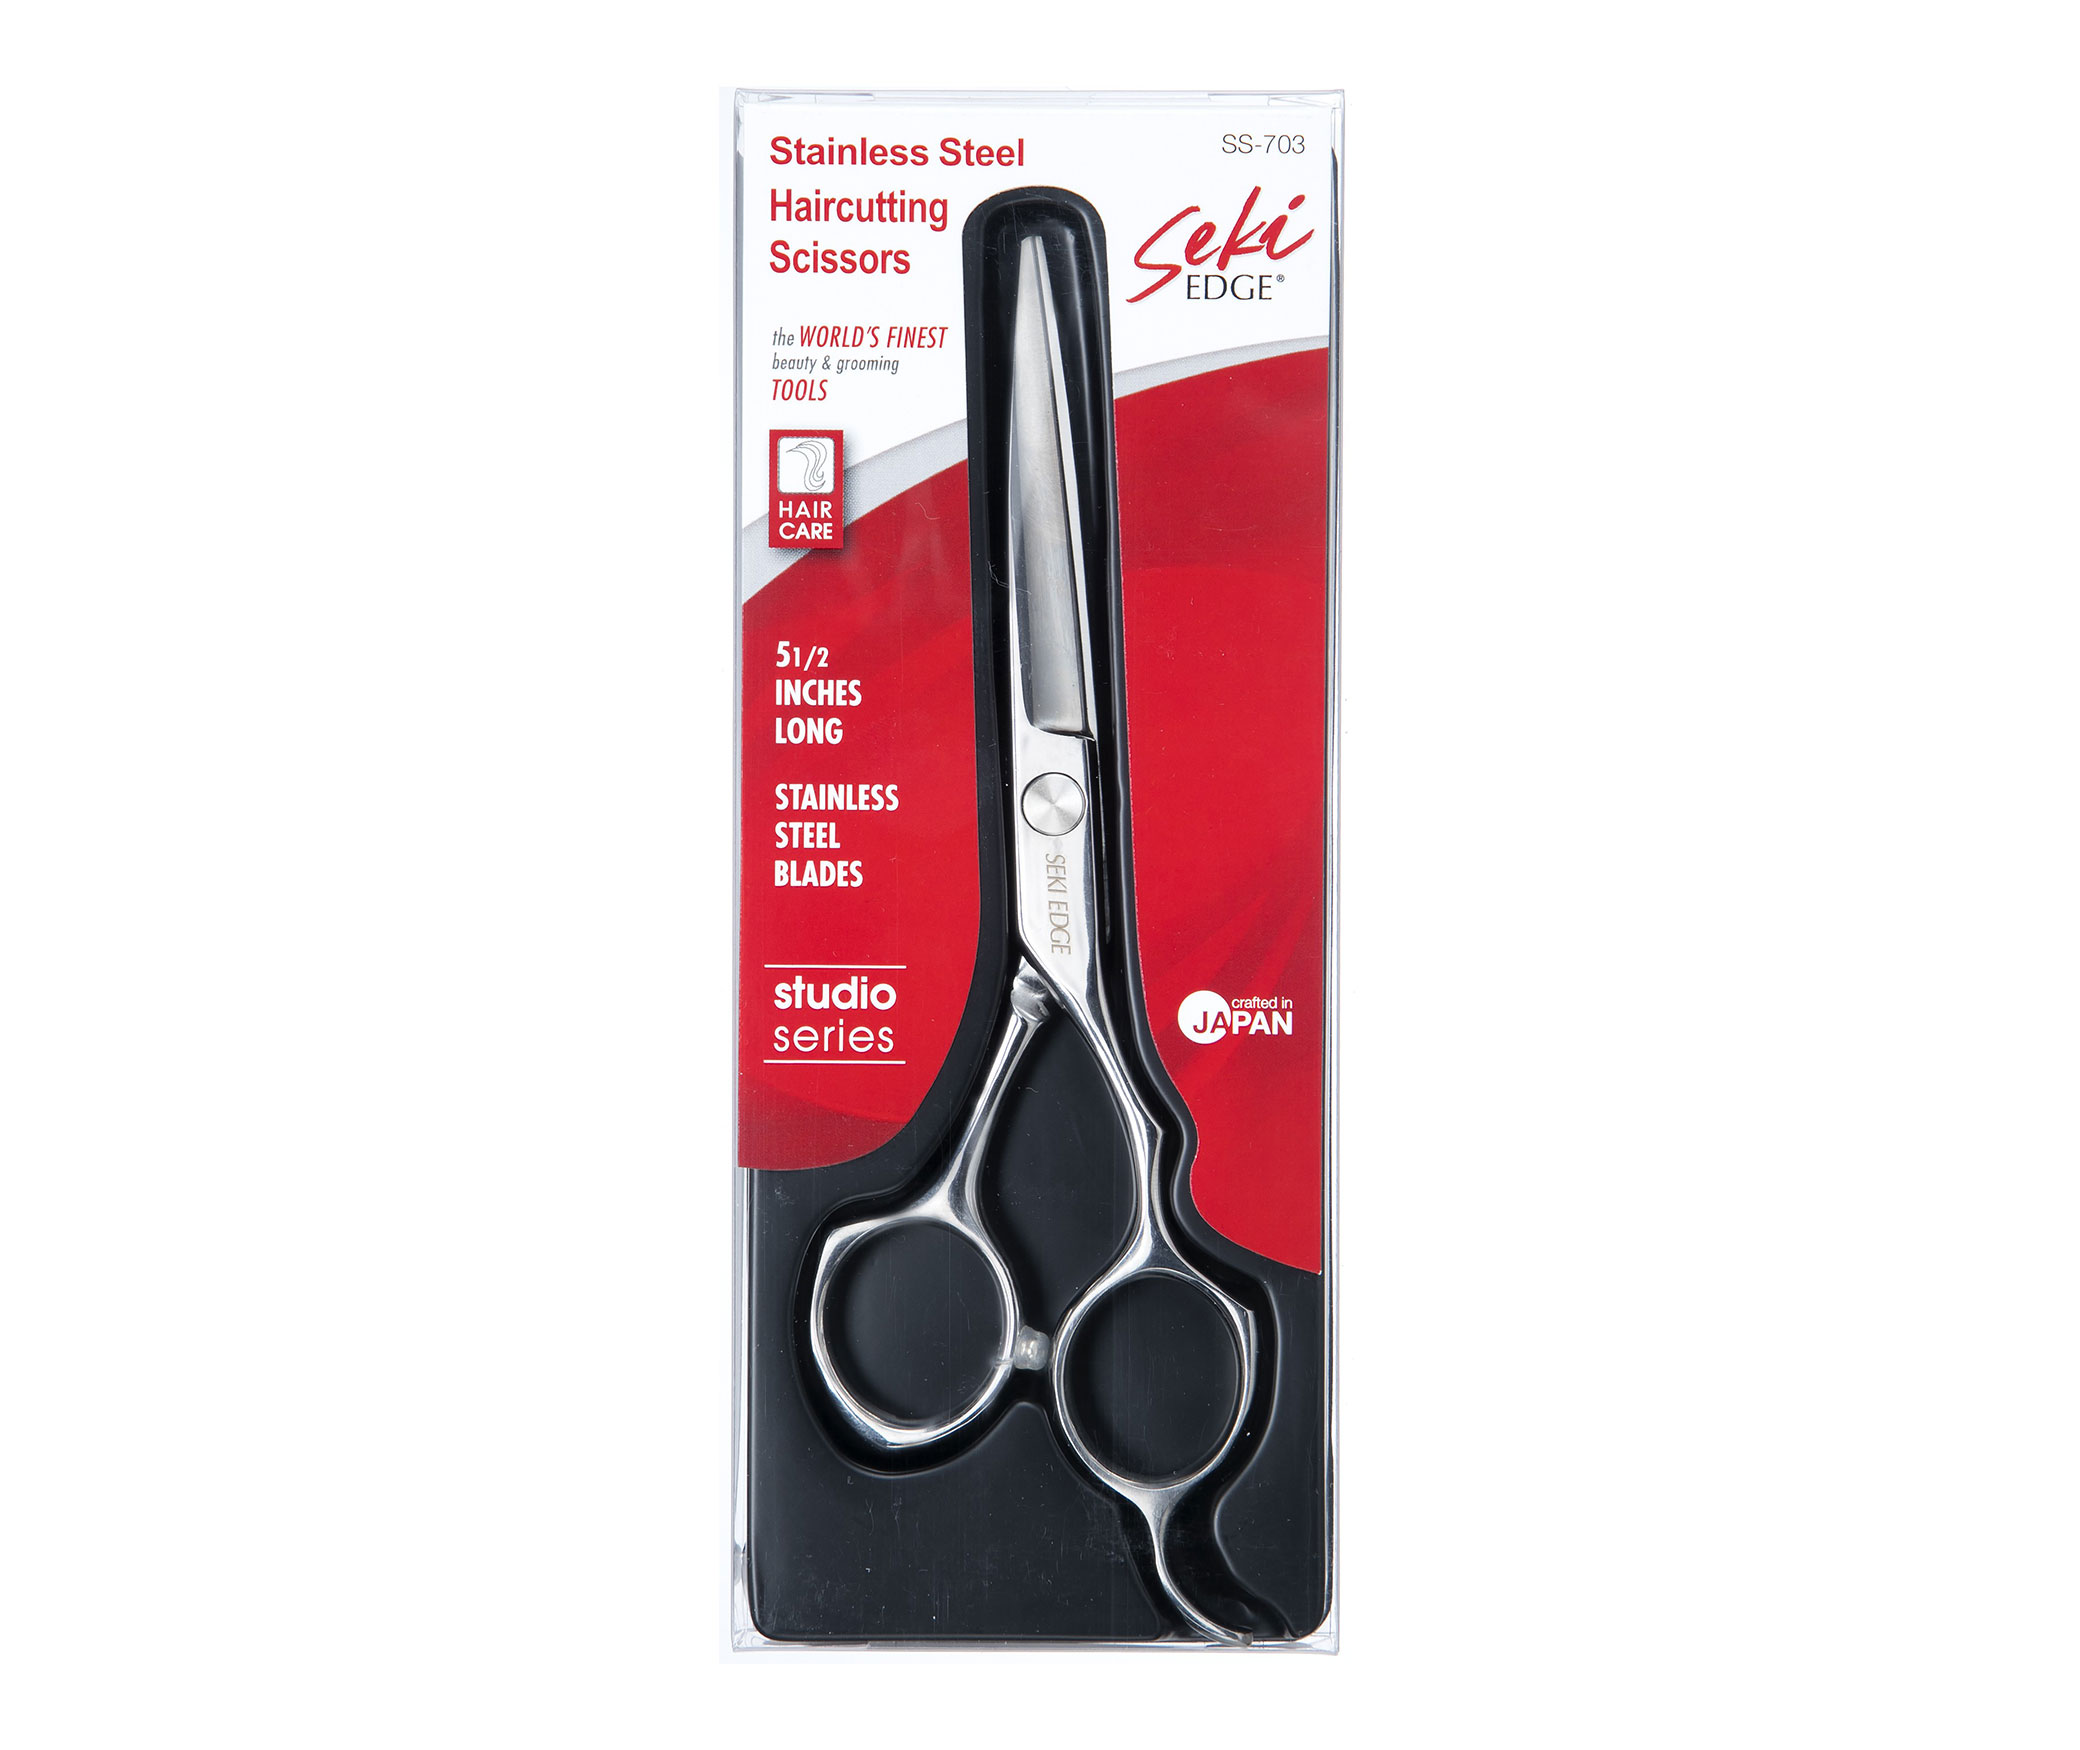 Seki Edge Stainless Steel Haircutting Scissors (SS-703) package